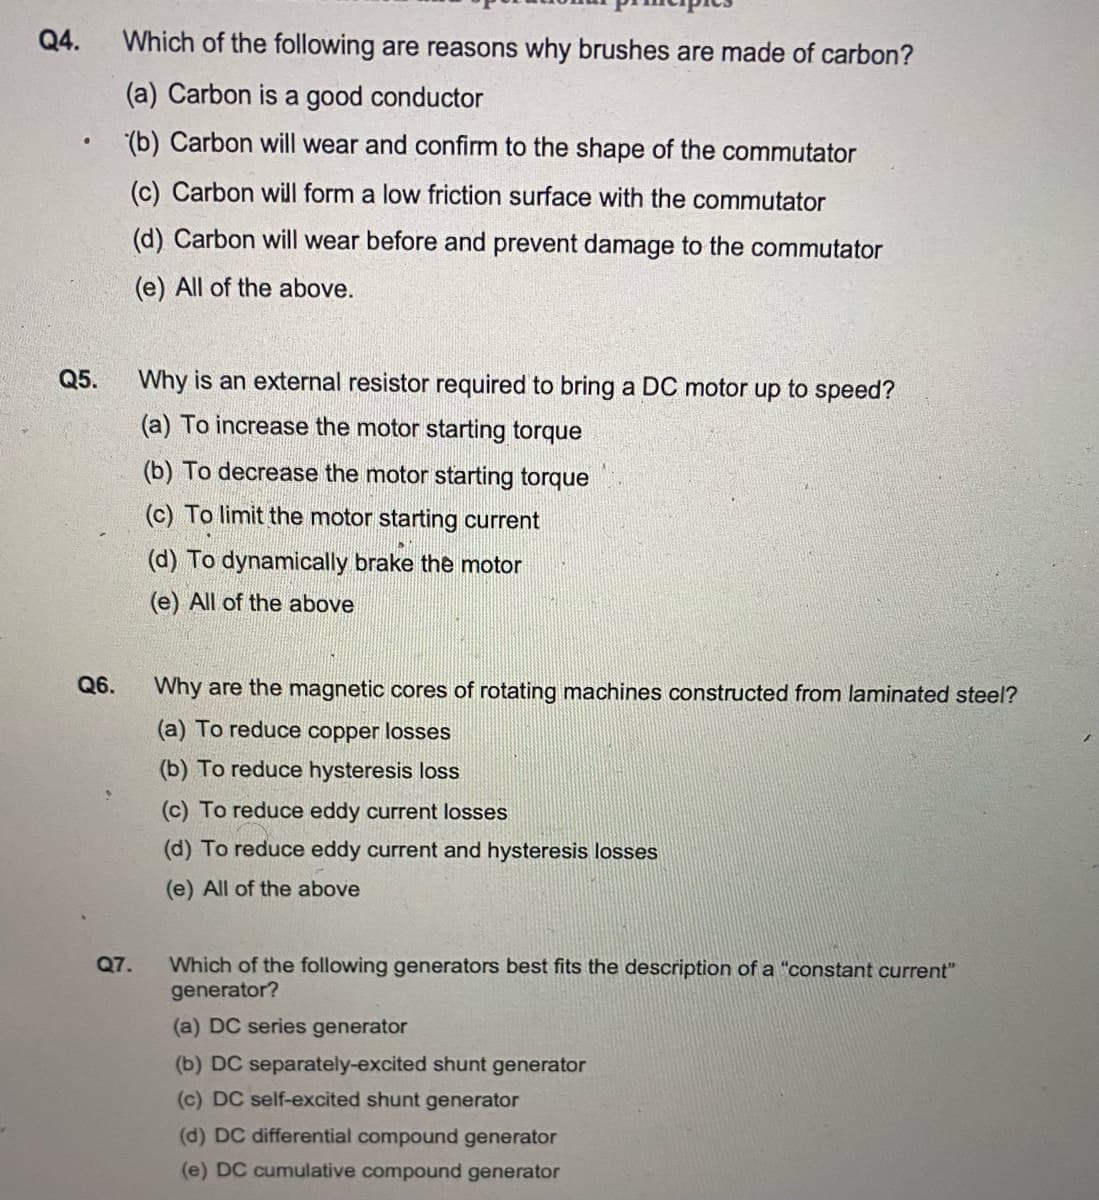 Q4.
Which of the following are reasons why brushes are made of carbon?
(a) Carbon is a good conductor
(b) Carbon will wear and confirm to the shape of the commutator
(c) Carbon will form a low friction surface with the commutator
(d) Carbon will wear before and prevent damage to the commutator
(e) All of the above.
Q5.
Why is an external resistor required to bring a DC motor up to speed?
(a) To increase the motor starting torque
(b) To decrease the motor starting torque
(c) To limit the motor starting current
(d) To dynamically brake the motor
(e) All of the above
Q6.
Why are the magnetic cores of rotating machines constructed from laminated steel?
(a) To reduce copper losses
(b) To reduce hysteresis loss
(c) To reduce eddy current losses
(d) To reduce eddy current and hysteresis losses
(e) All of the above
Which of the following generators best fits the description of a "constant current"
generator?
Q7.
(a) DC series generator
(b) DC separately-excited shunt generator
(c) DC self-excited shunt generator
(d) DC differential compound generator
(e) DC cumulative compound generator
